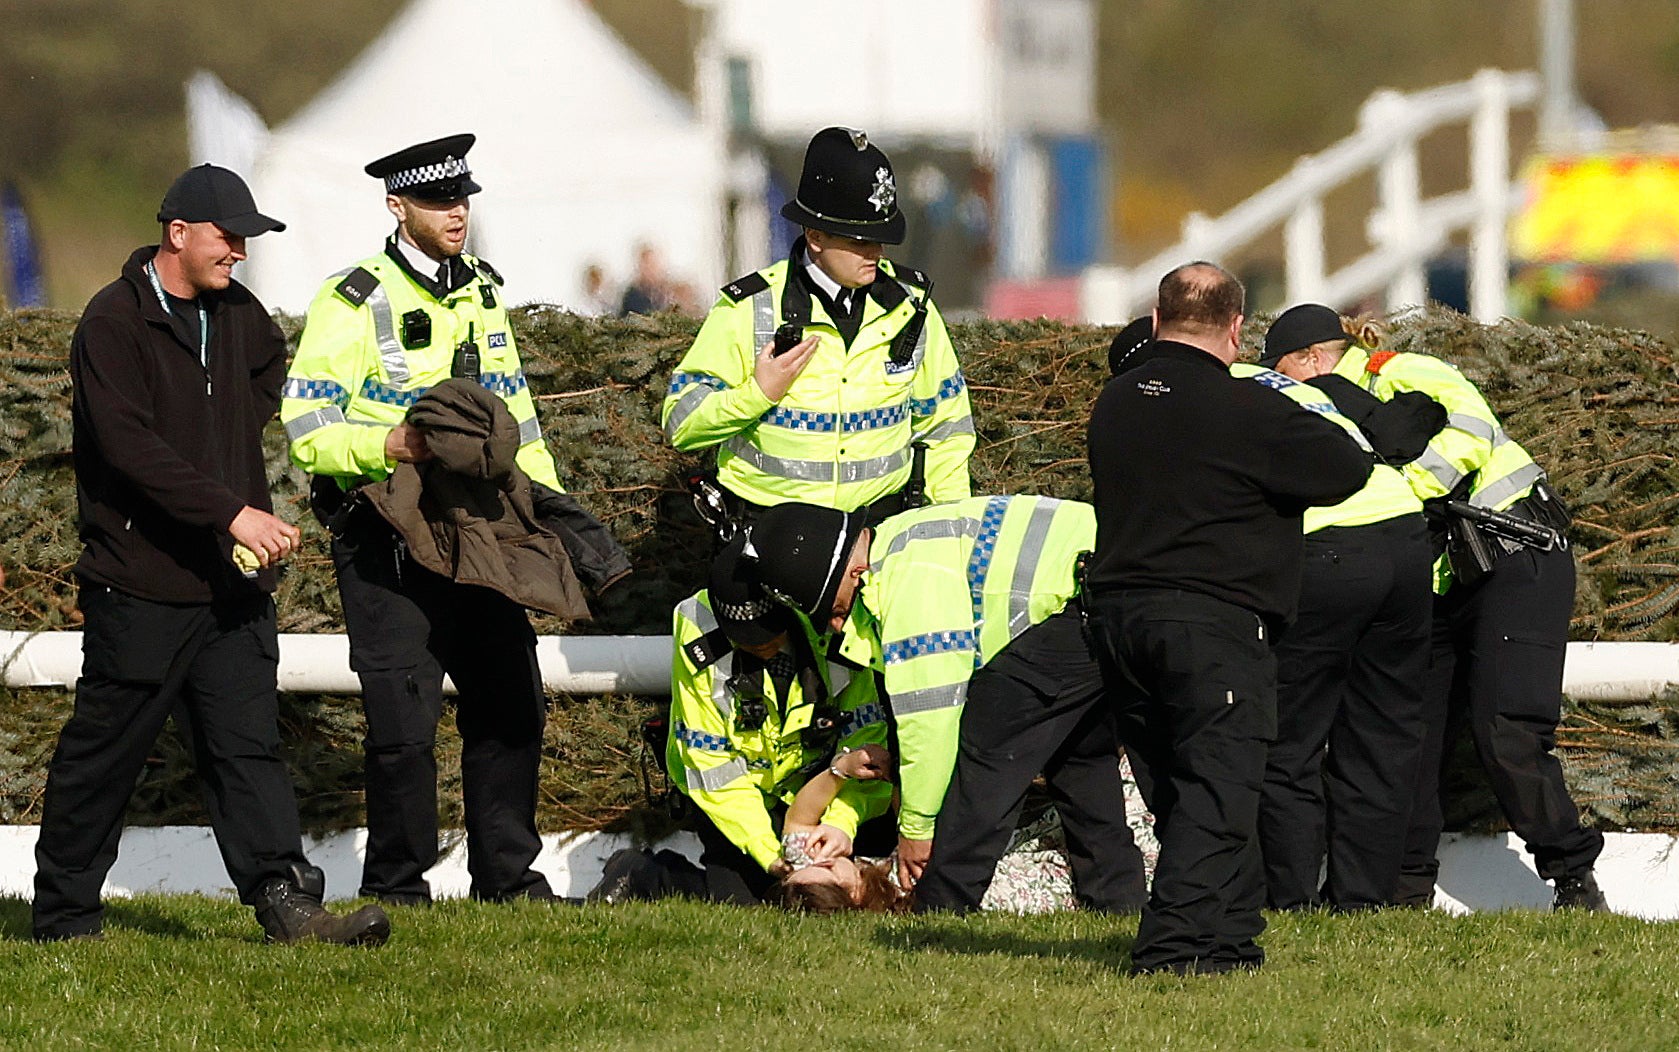 Police contain protestors on the Aintree racecourse